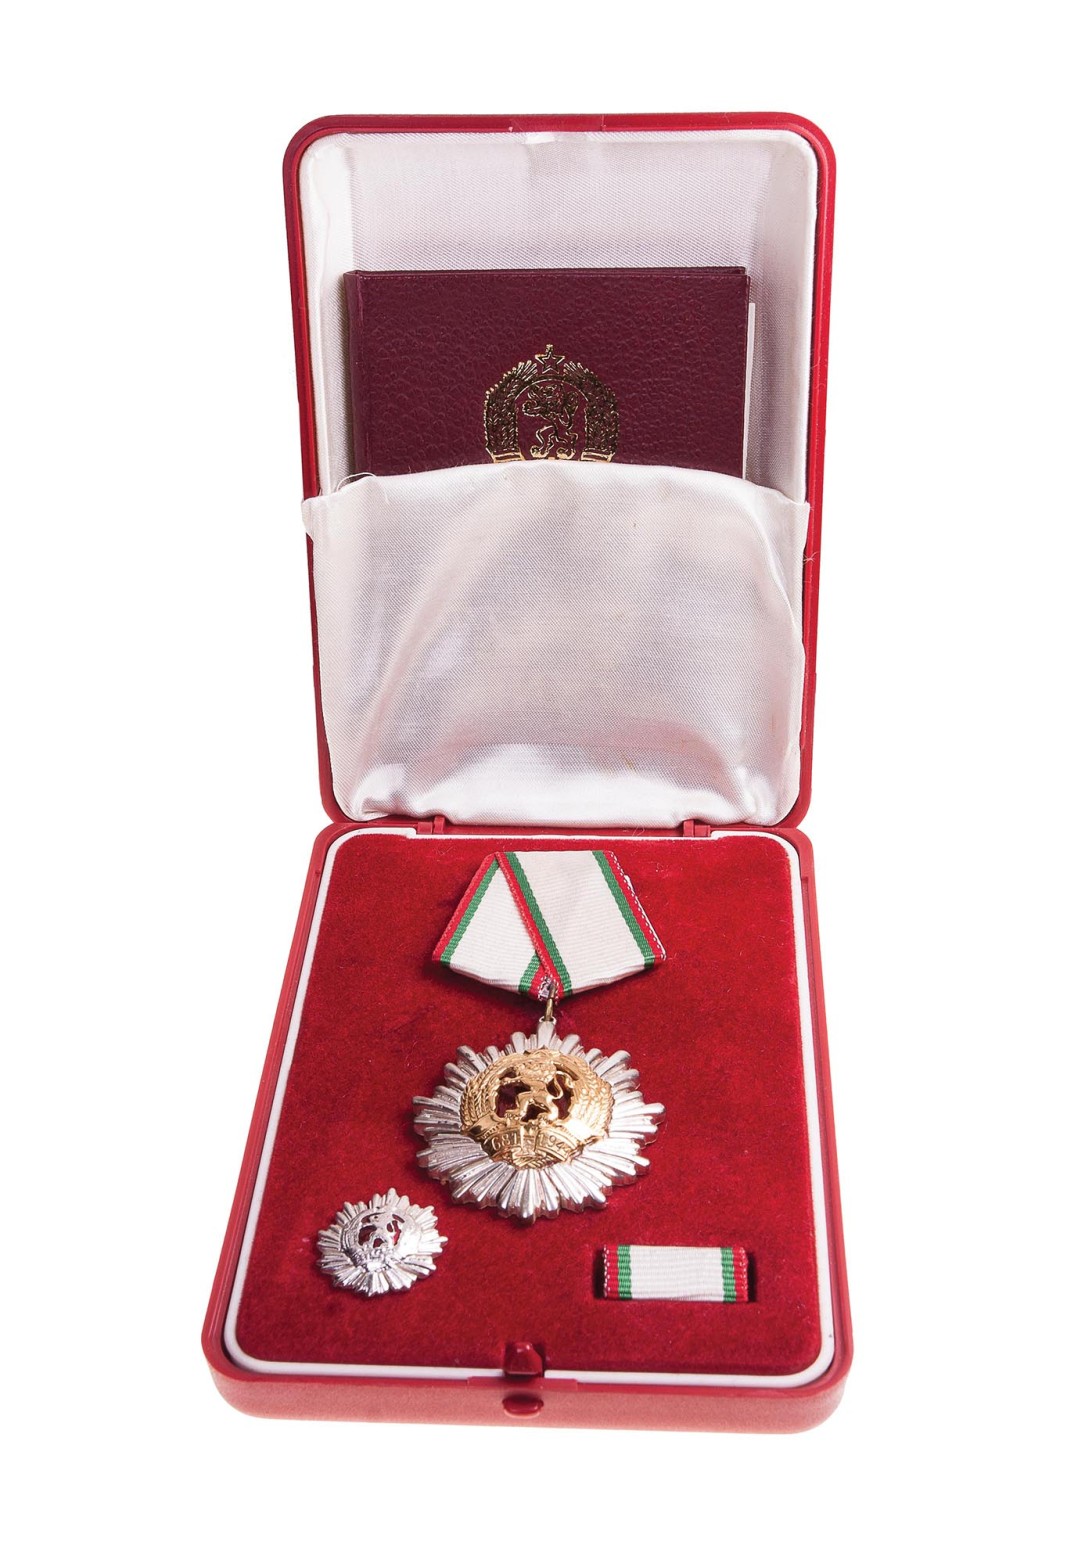 Order People's Republic of Bulgaria 2nd degree, in box